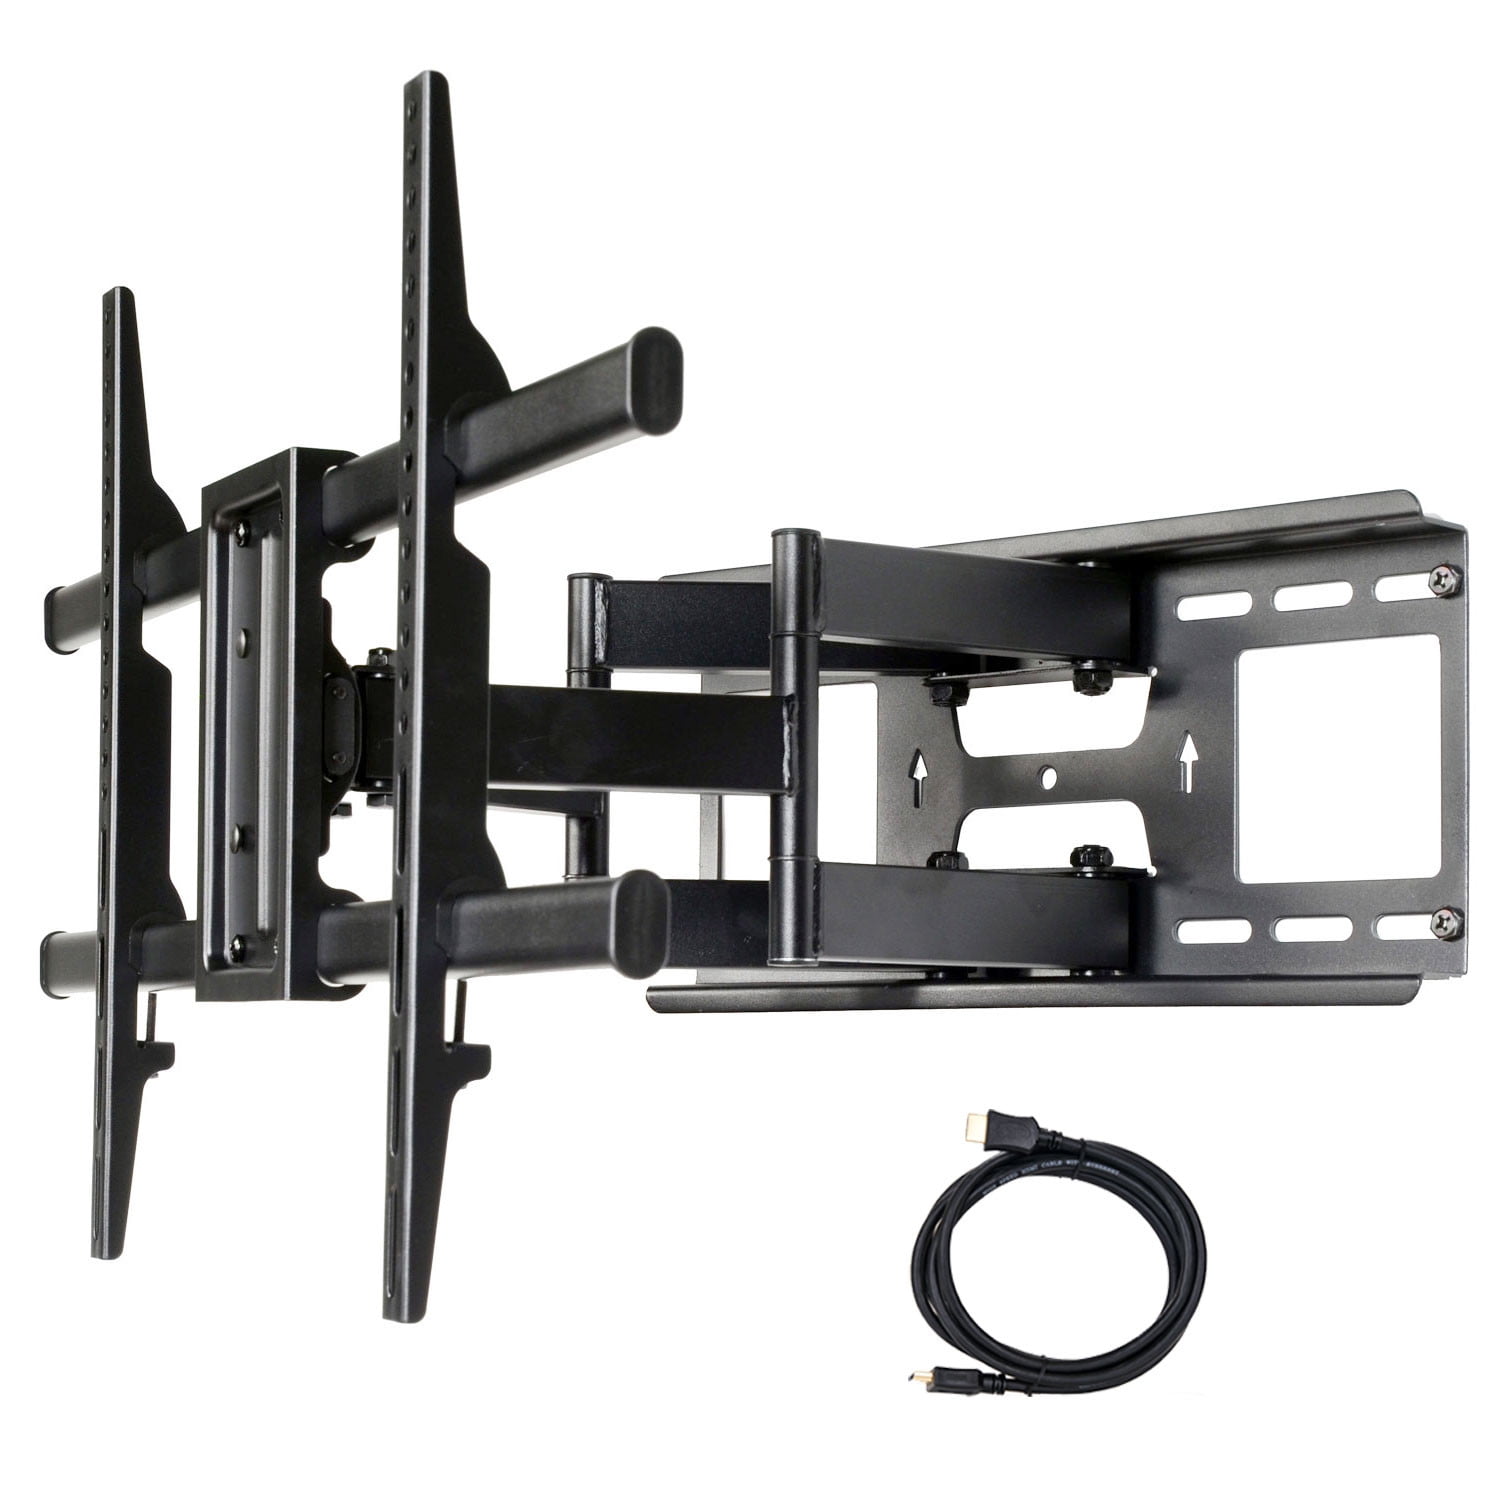 Details about   Full Motion TV Wall Mount Bracket 32"37"42"43"46"50"55"60" 65" inch LCD LED OLED 